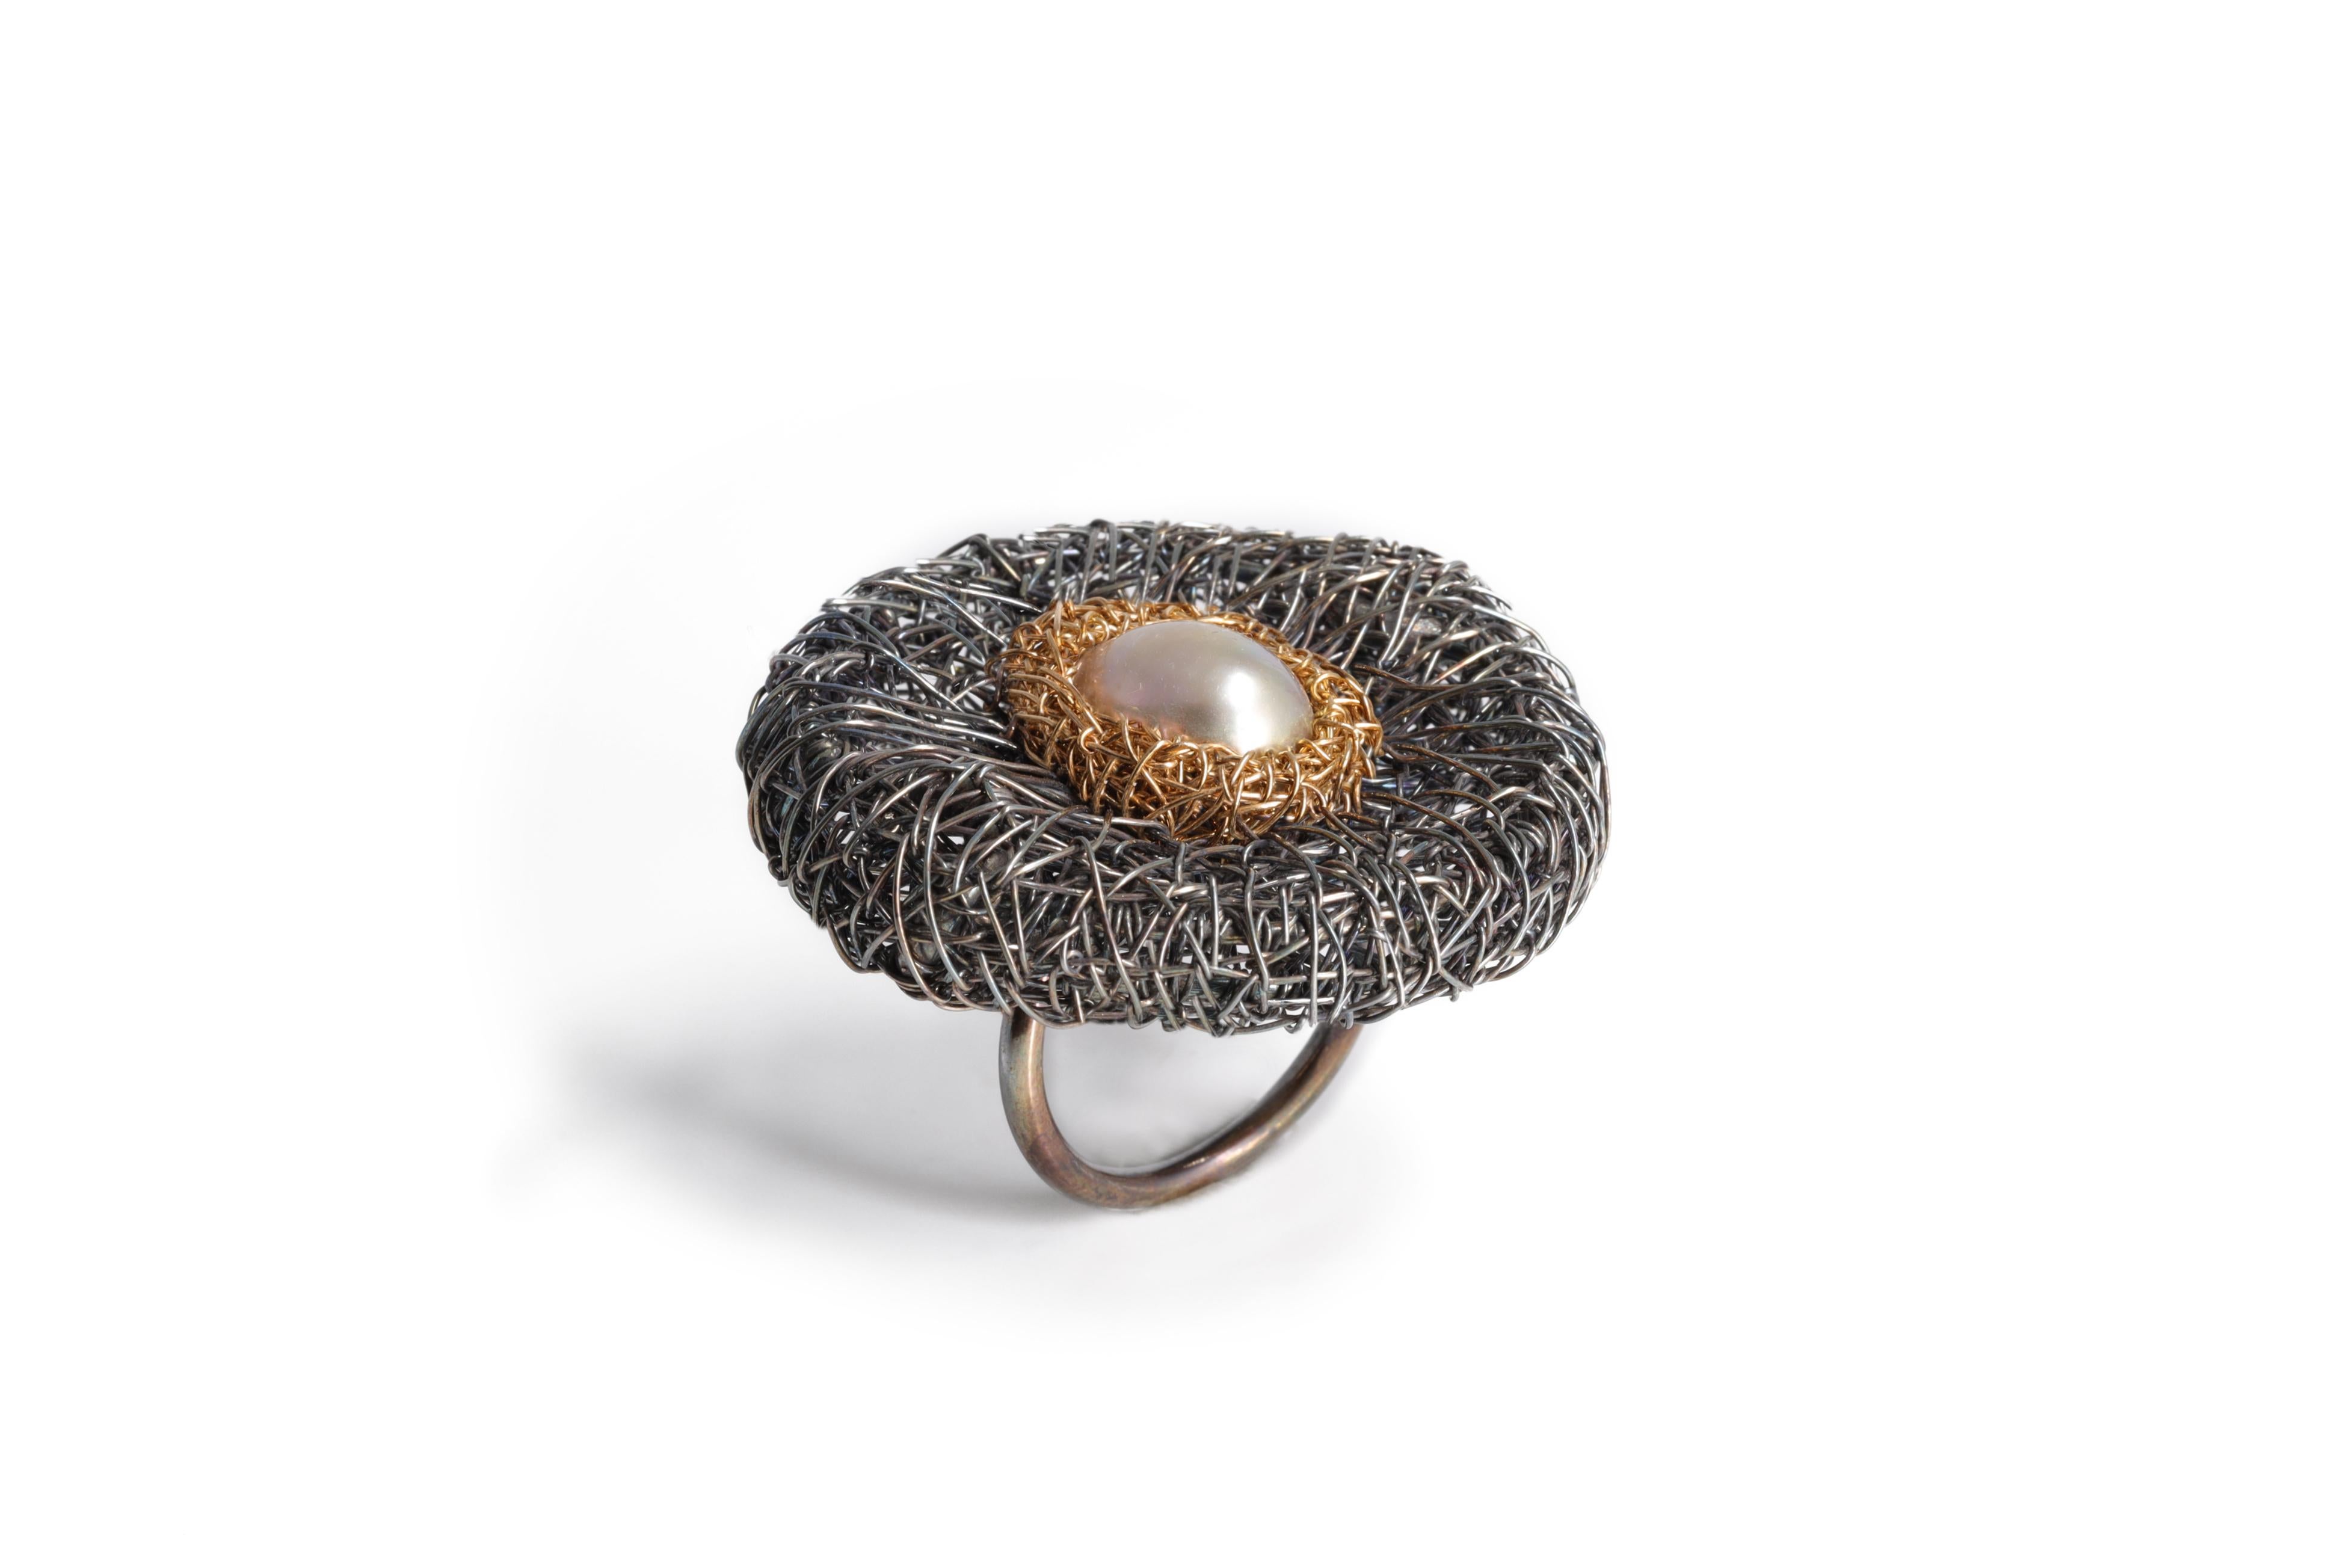 Contemporary 14 Karat Gold Sterling Silver Sweetwater Pearl Cocktail Ring by Sheila Westera